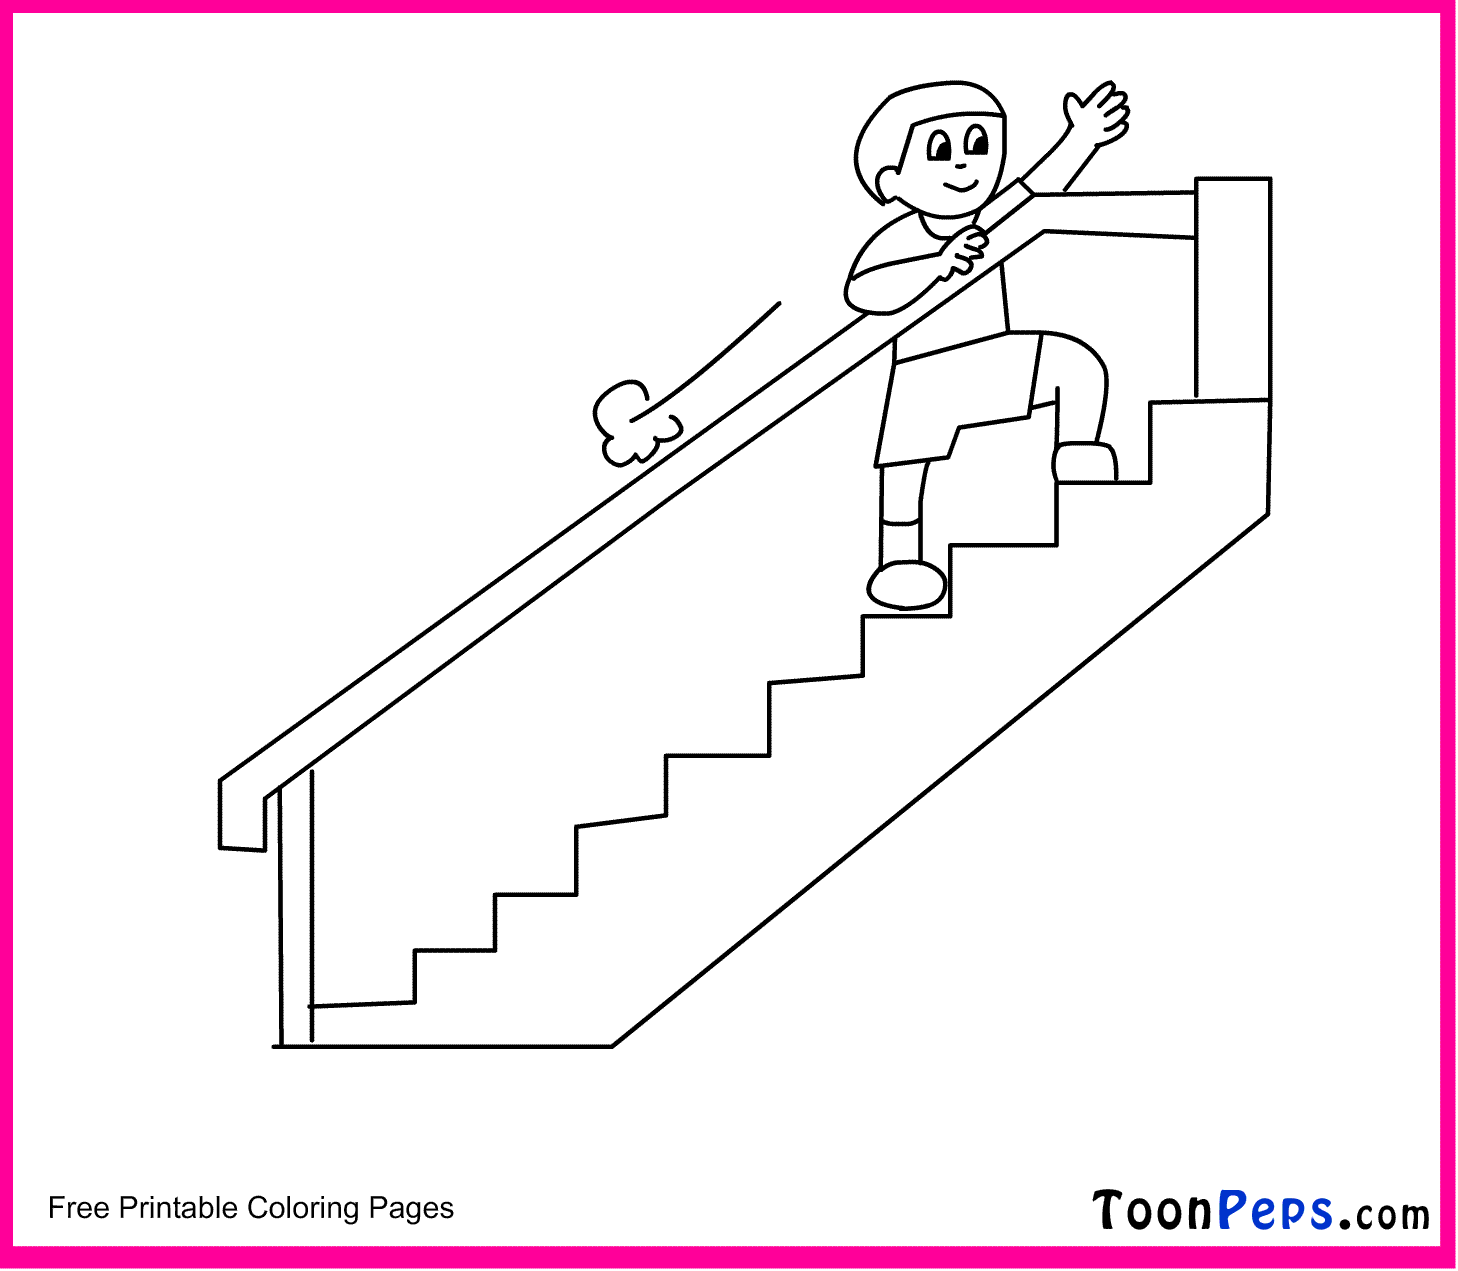 Stairs coloring #19, Download drawings